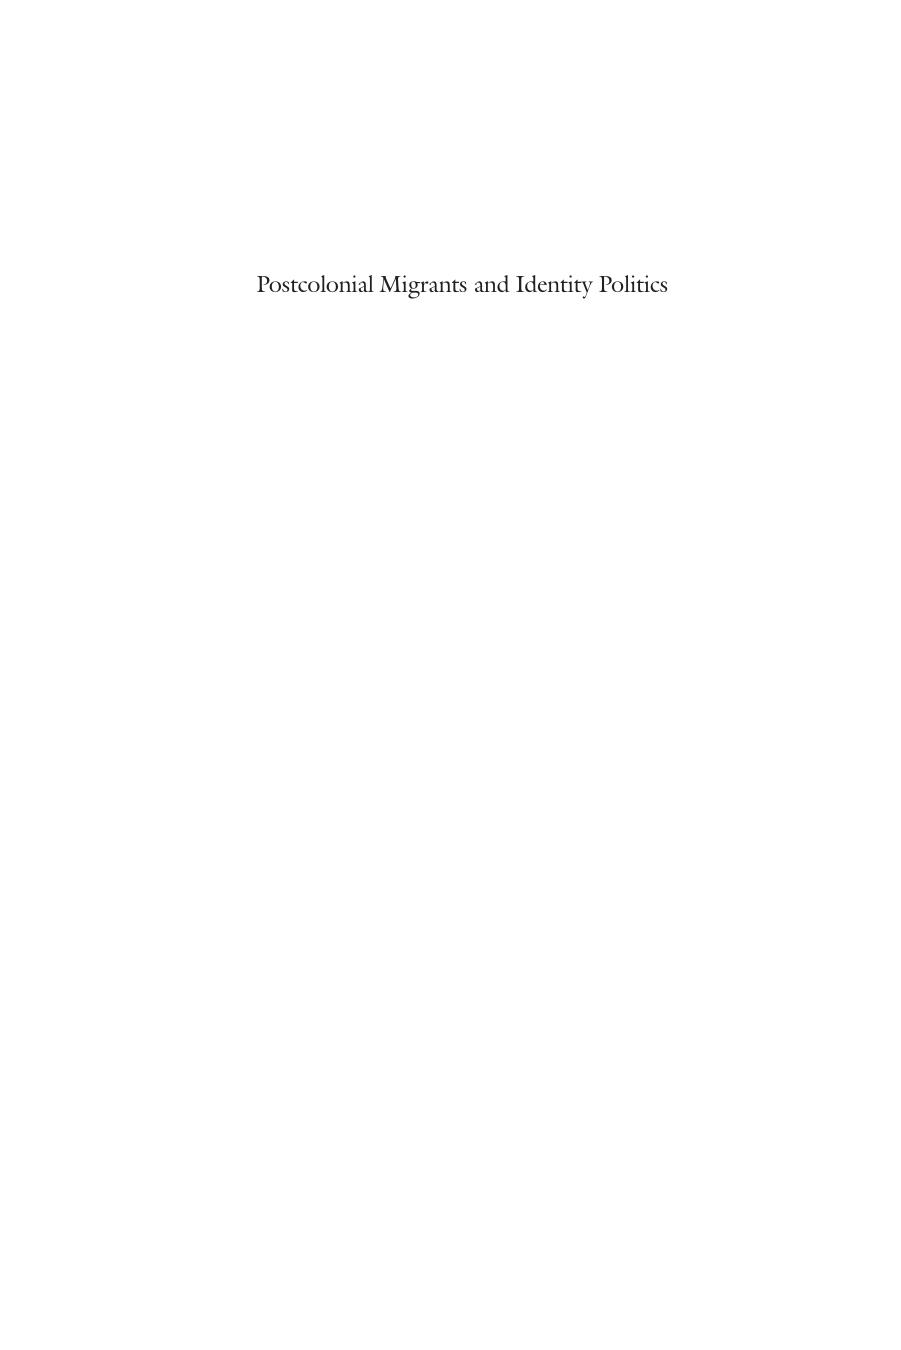 Postcolonial Migrants and Identity Politics: Europe, Russia, Japan and the United States in Comparison by Ulbe Bosma (editor); Jan Lucassen (editor); Gert Oostindie (editor)